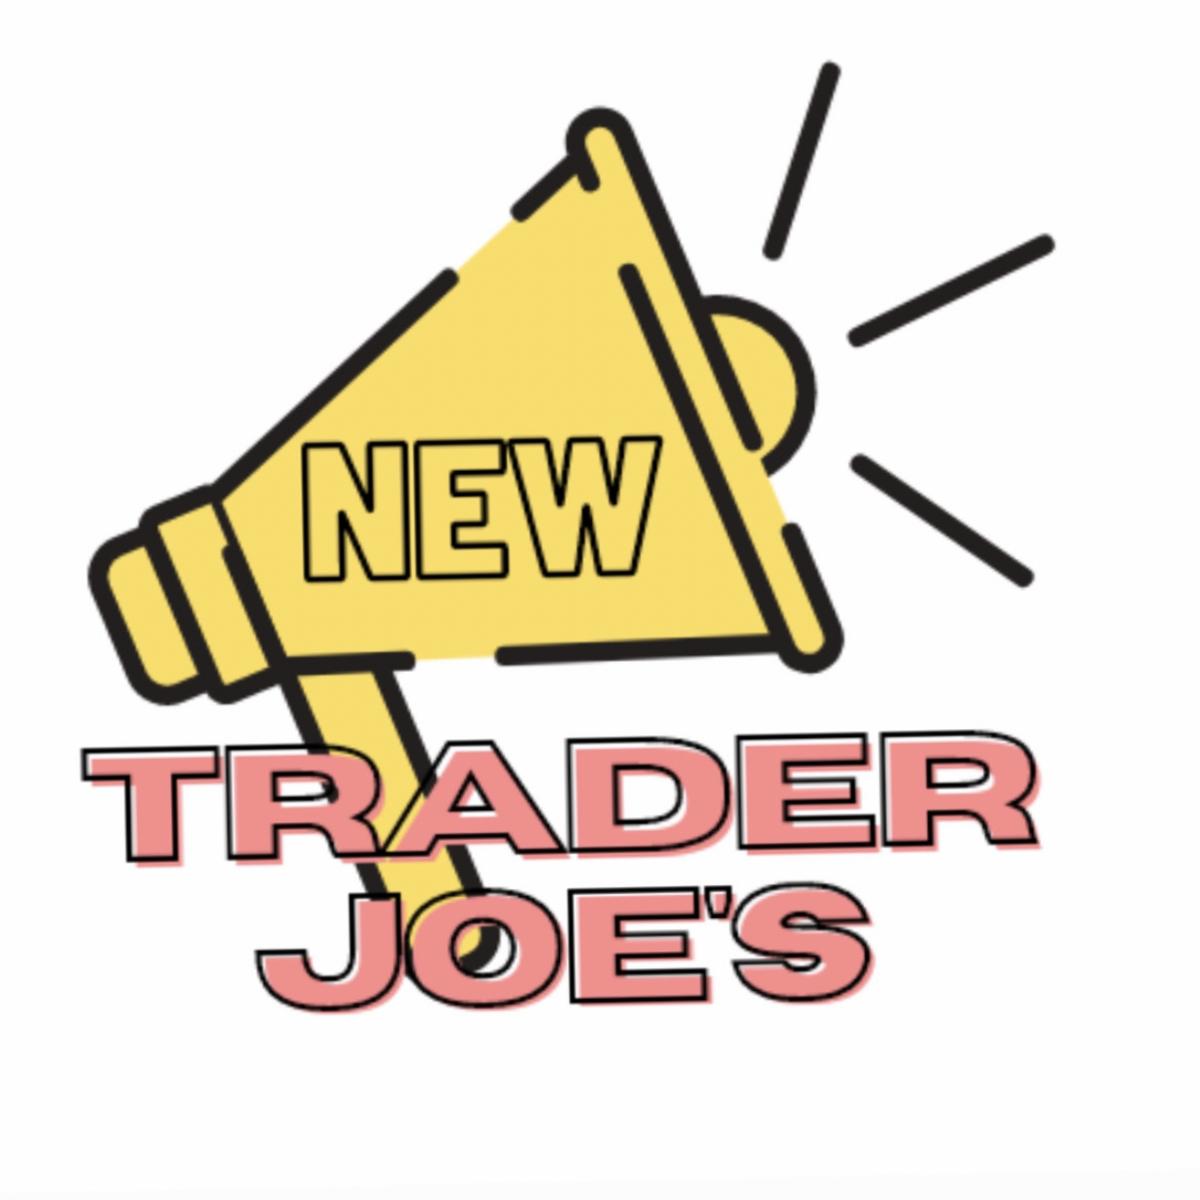 Traderjoesnew's images